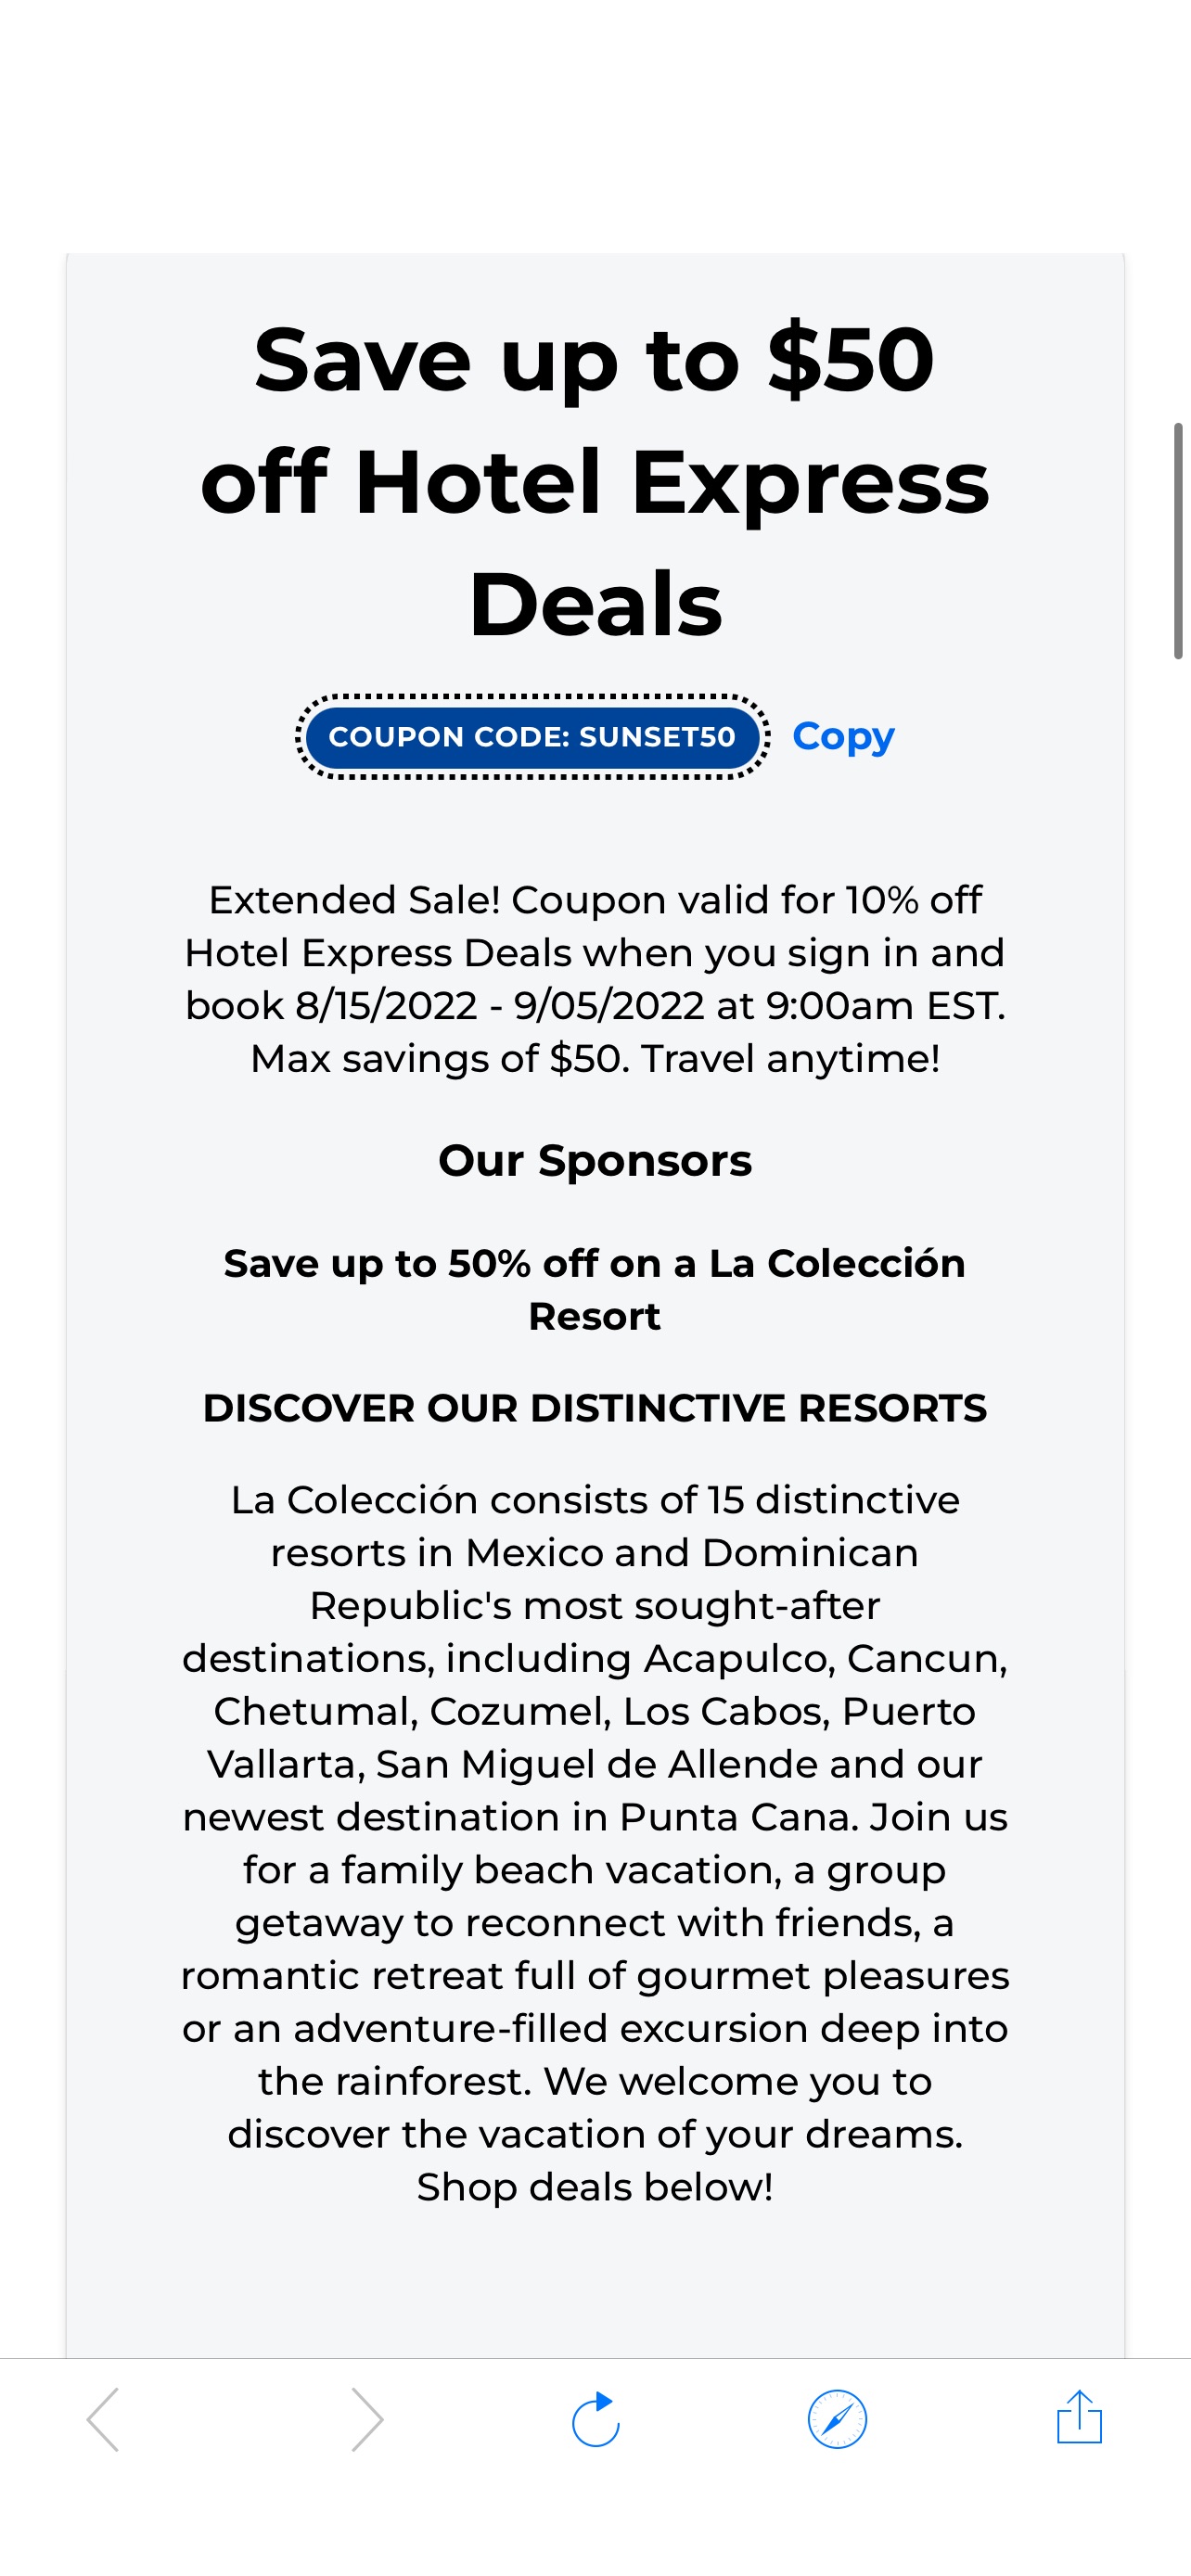 Priceline - Save up to $50 off Hotel Express Deals